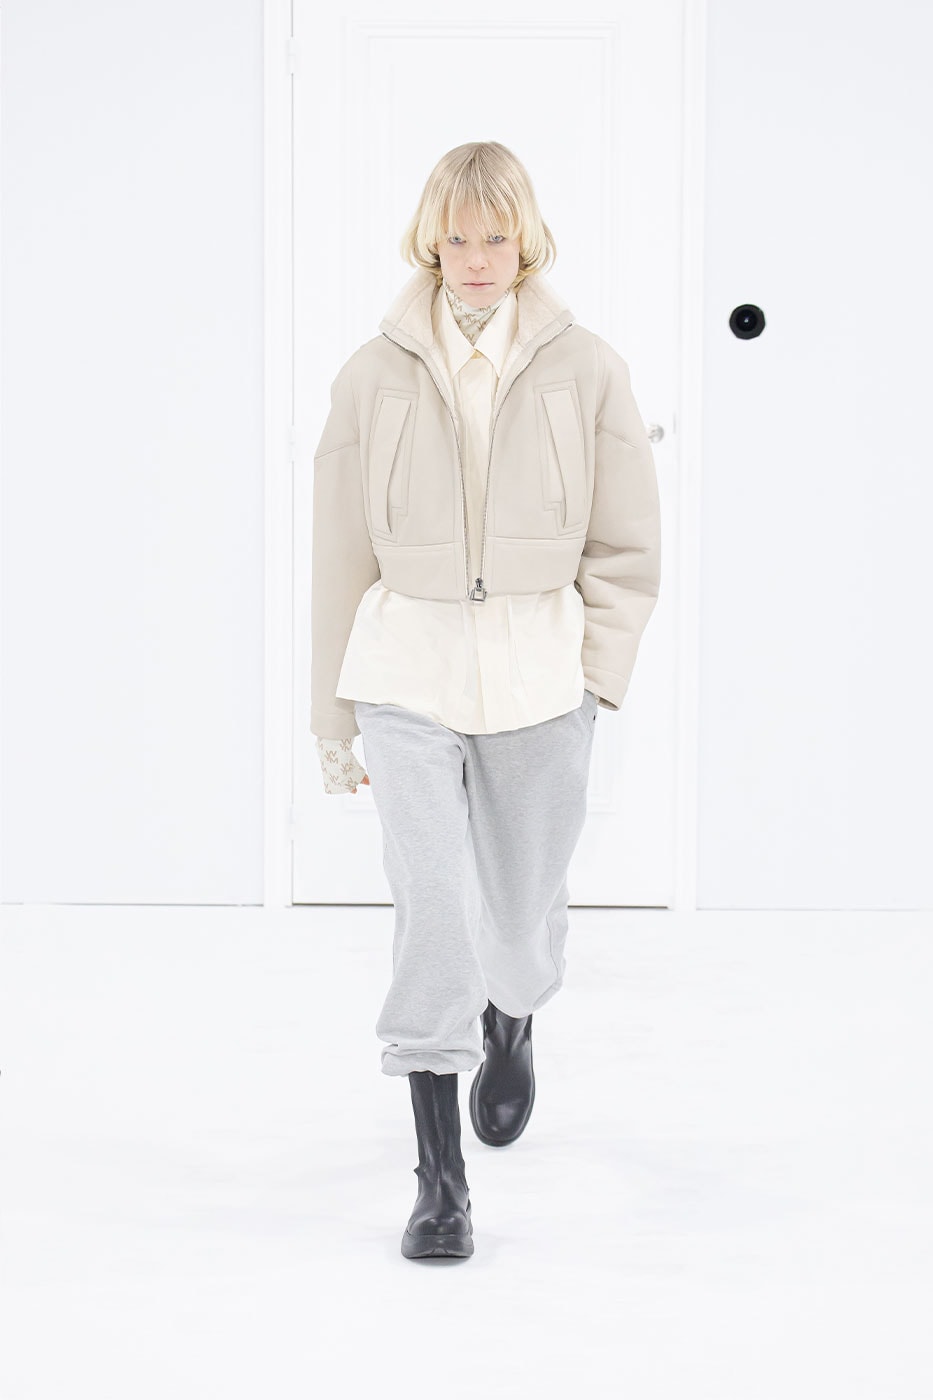 WOOYOUNGMI FW22 Finds the Sweet Spot for Comfortable Layering and Soft Tailoring fall/winter 2022 Paris Fashion Week Runway Collection